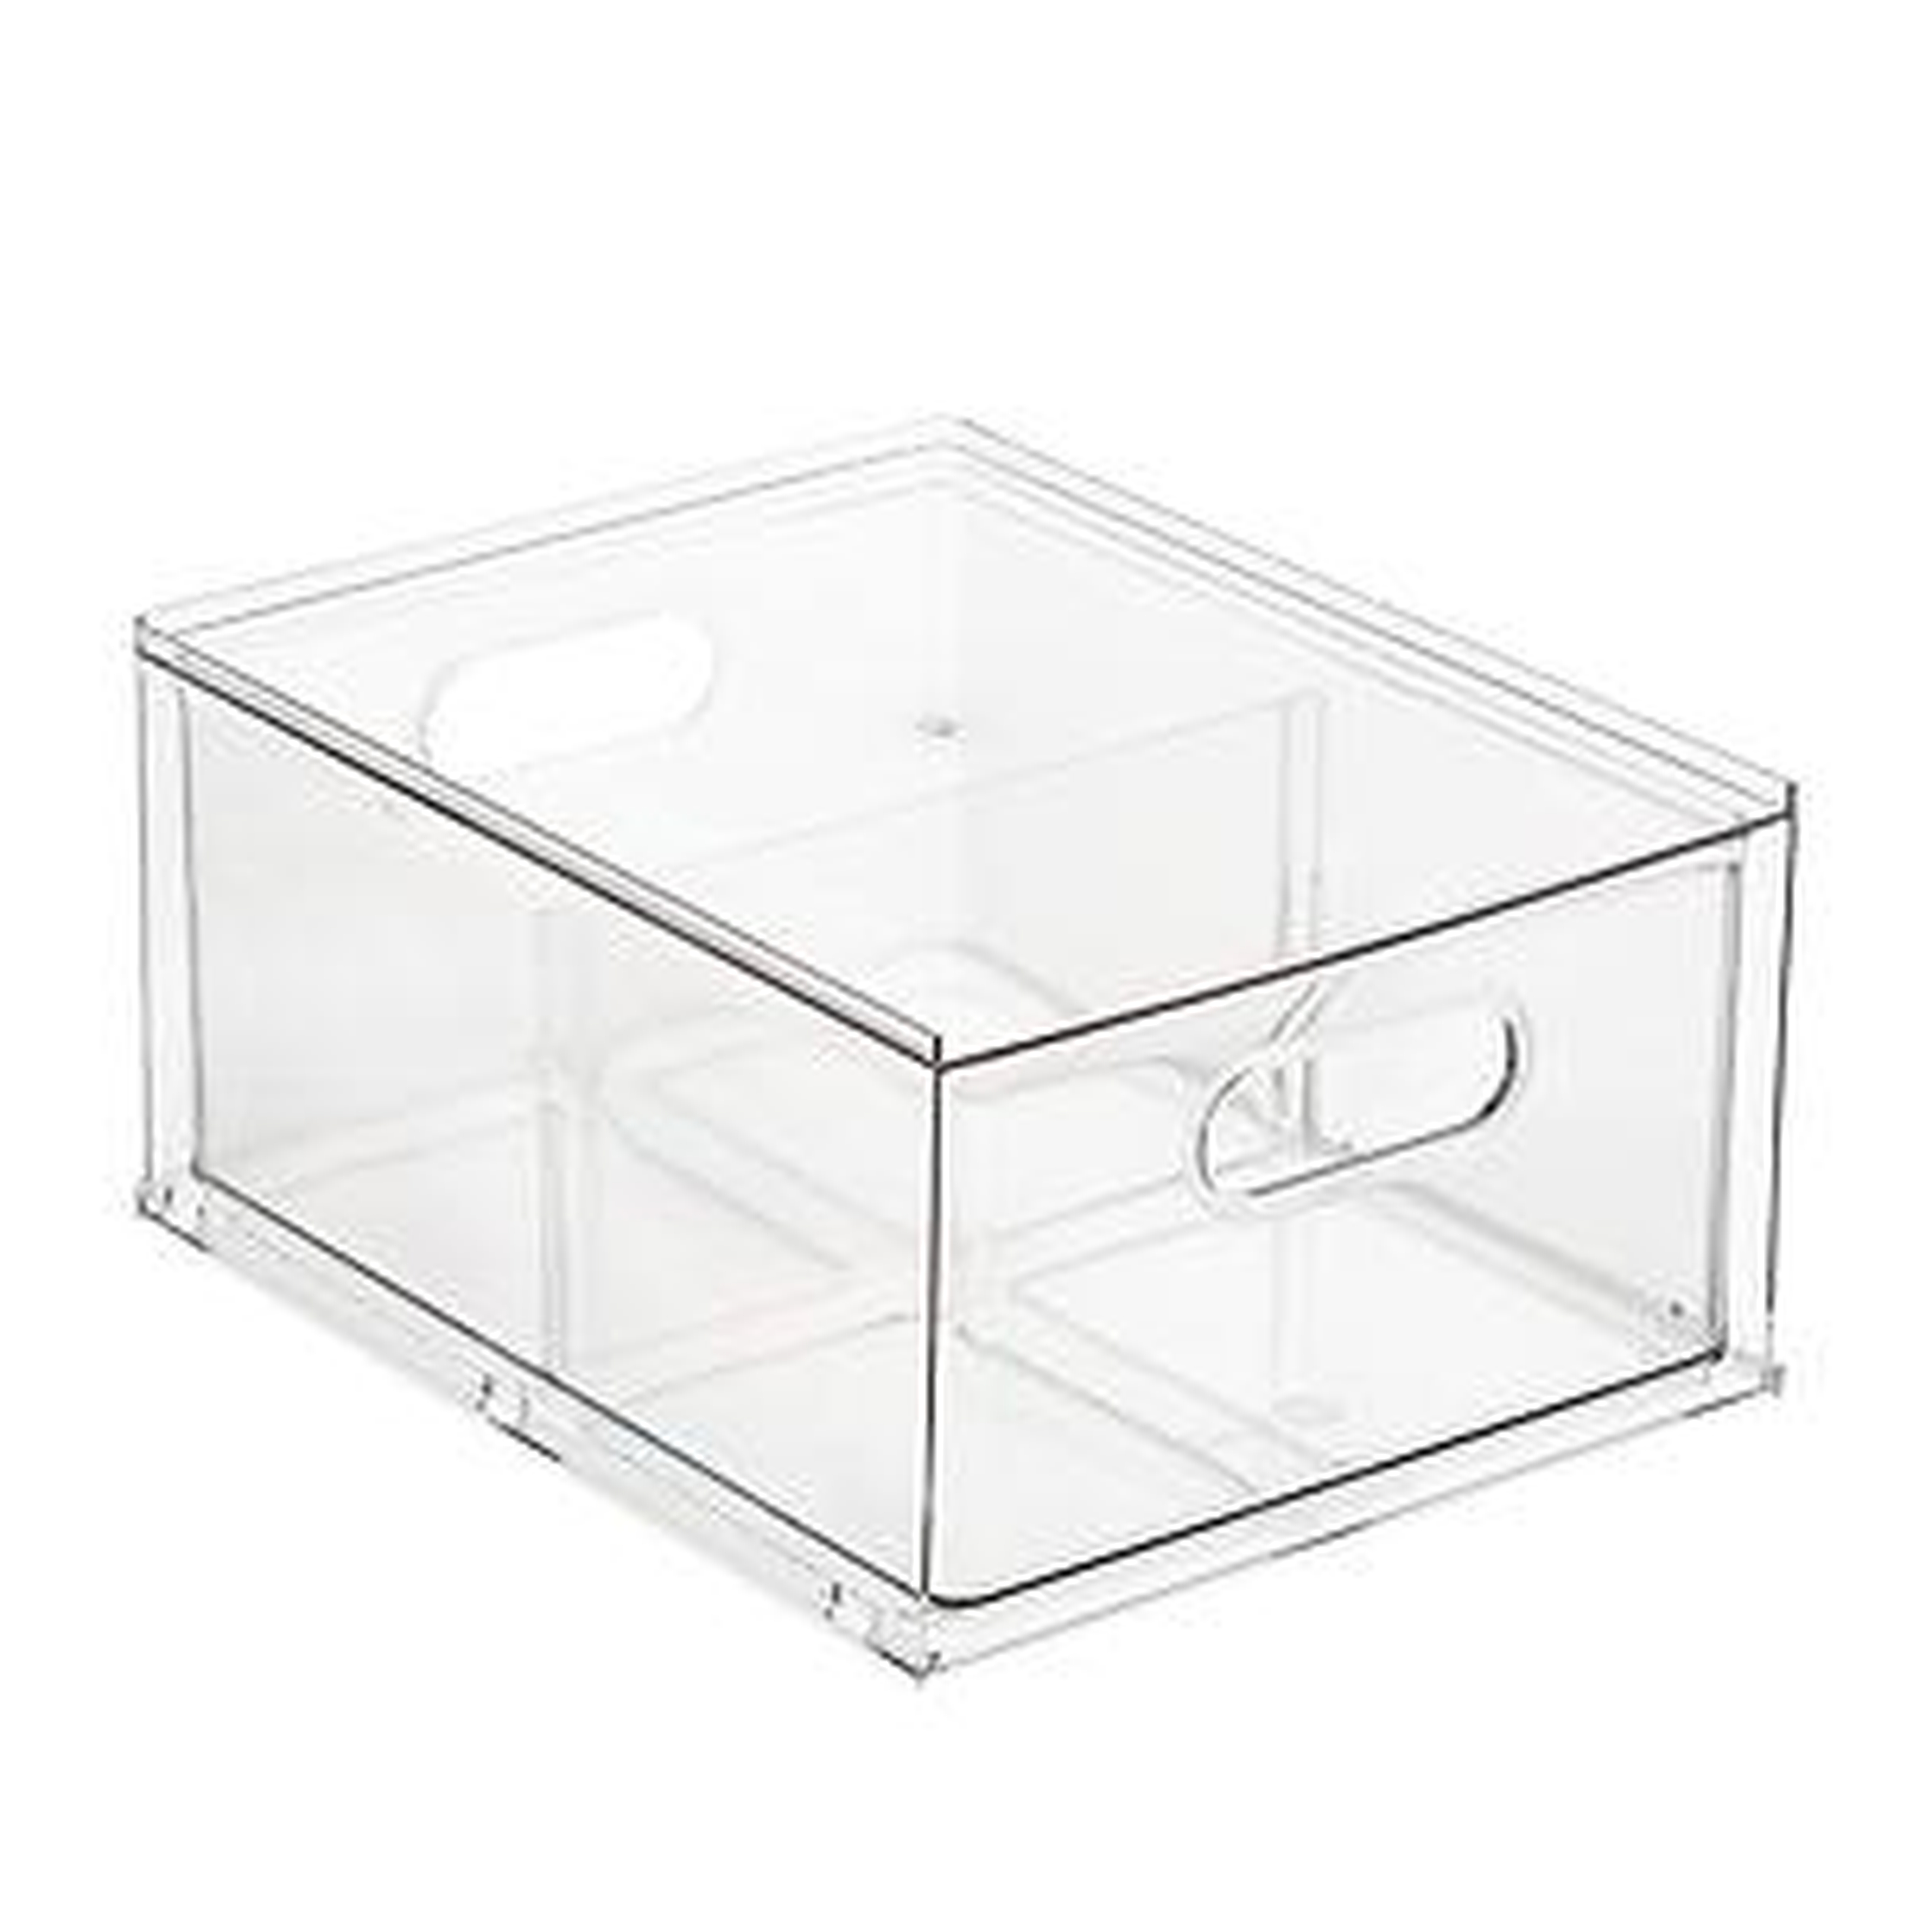 T.H.E. Stackable All-Purpose Drawer - containerstore.com